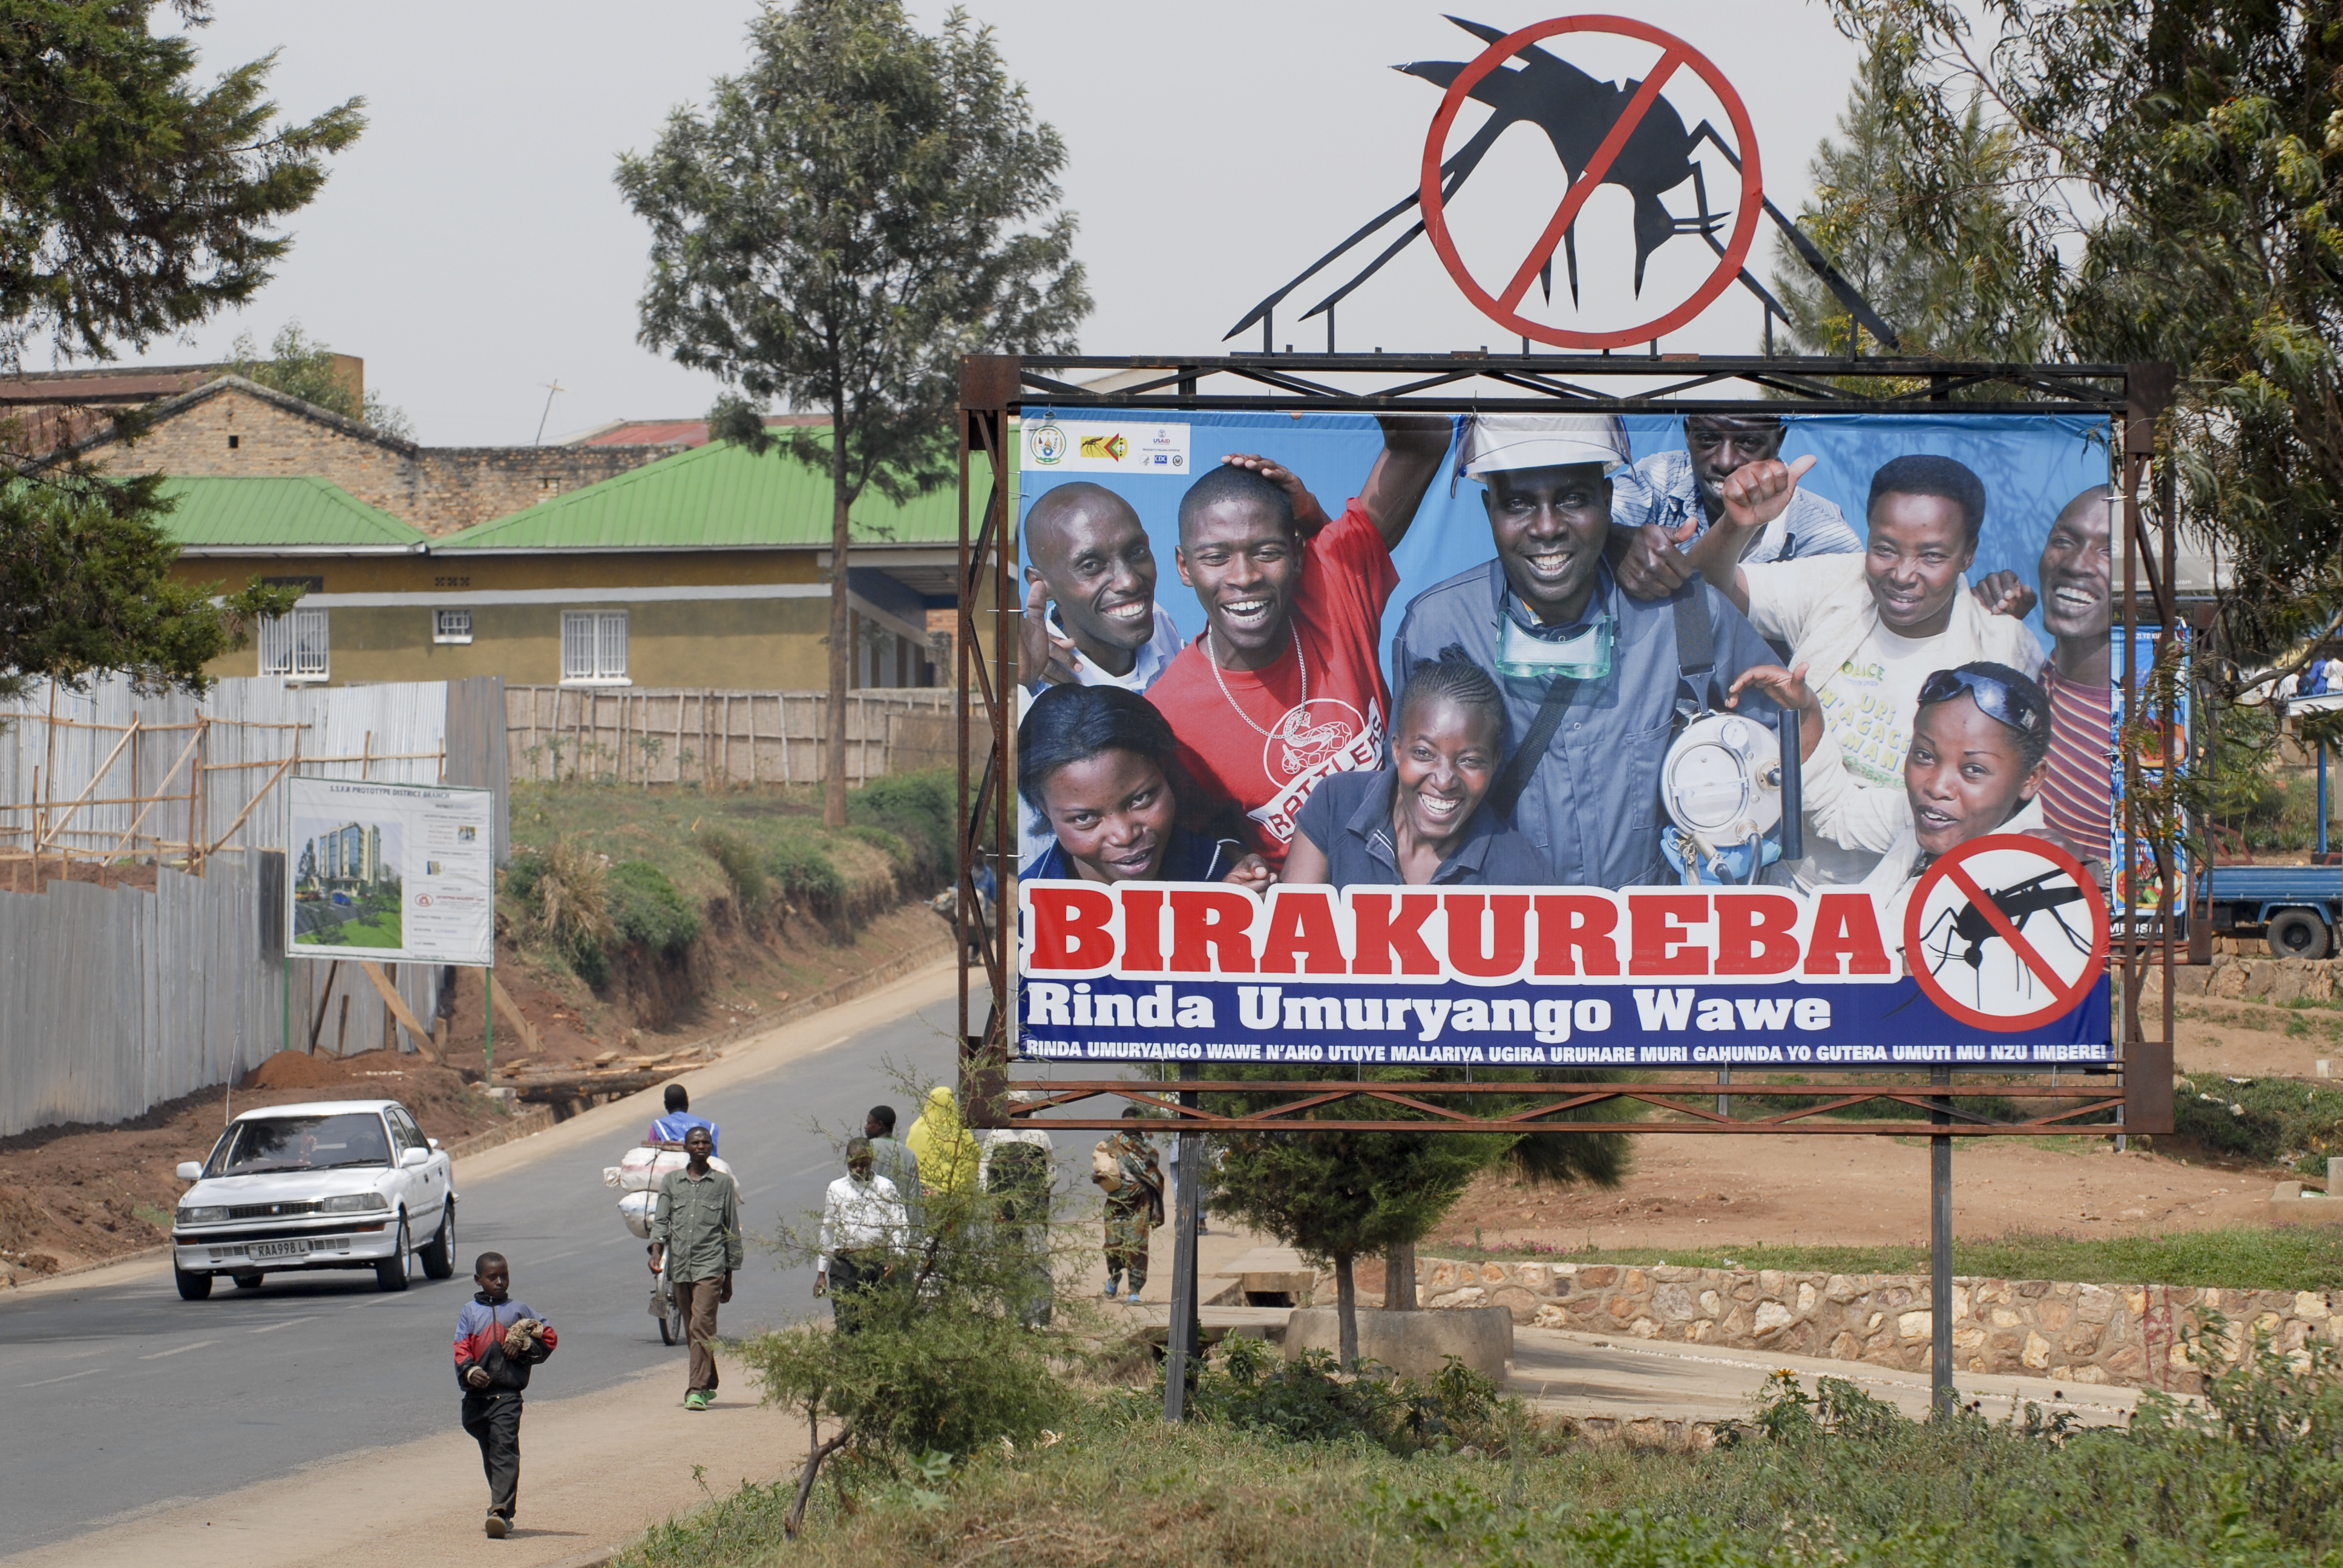 Death from malaria has dropped by 85.3 % from 2005 to 2011: awareness-raising billboard.